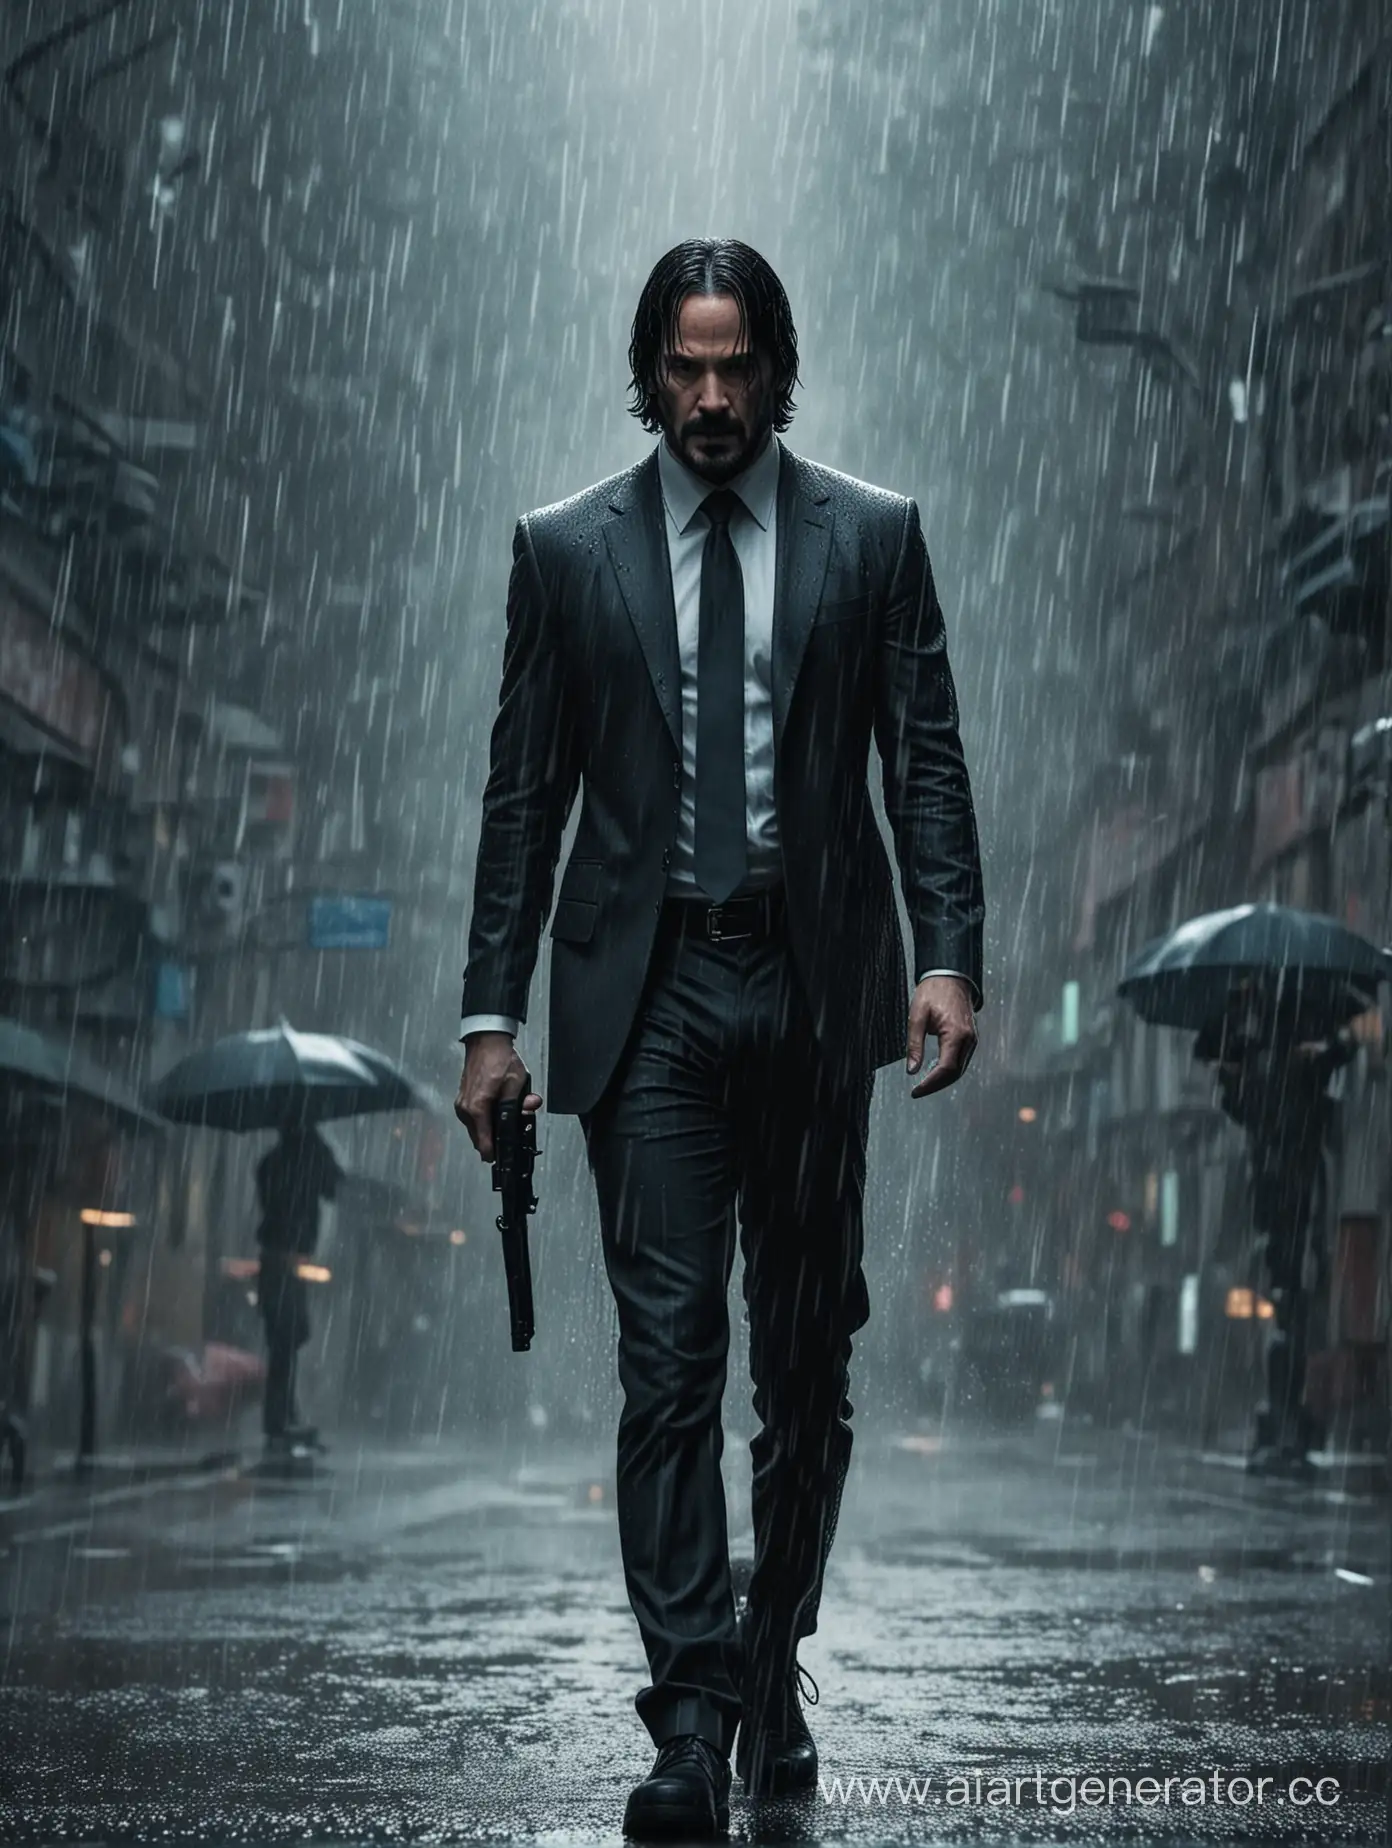 John-Wick-Inspired-Wallpaper-Vigilant-Figure-Stands-in-Rain-with-Weapons